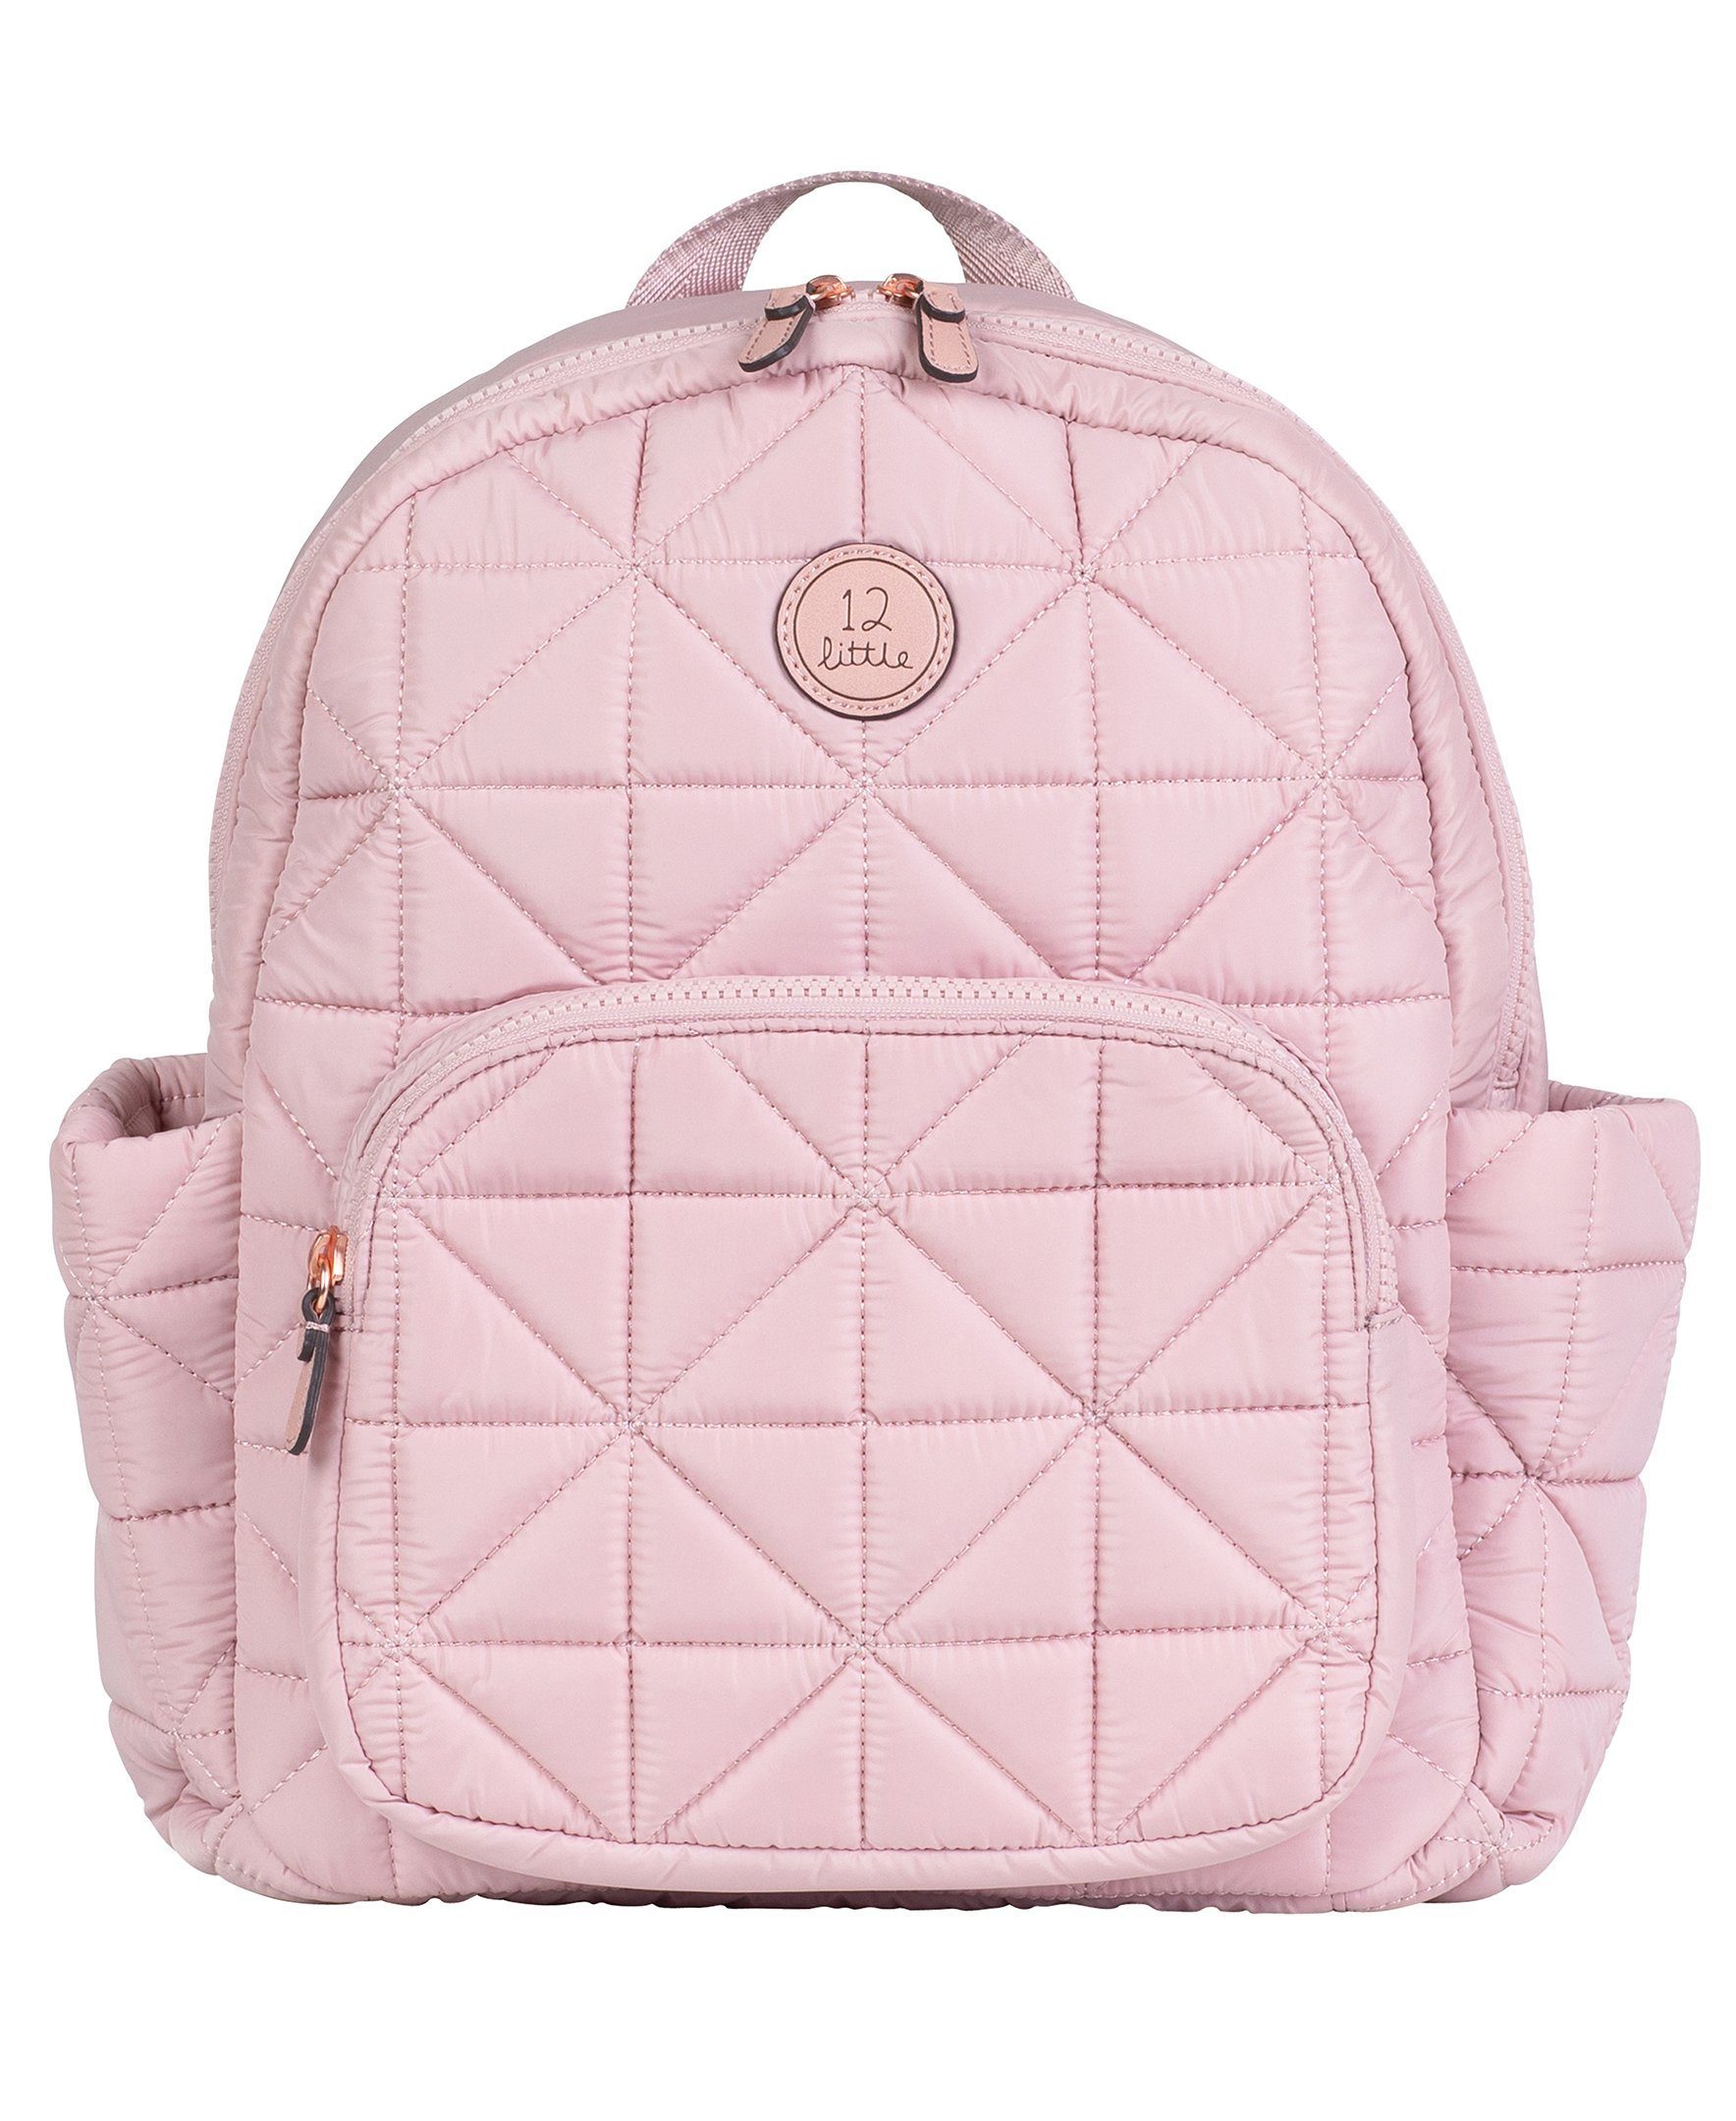 Little Companion Backpack - Pink